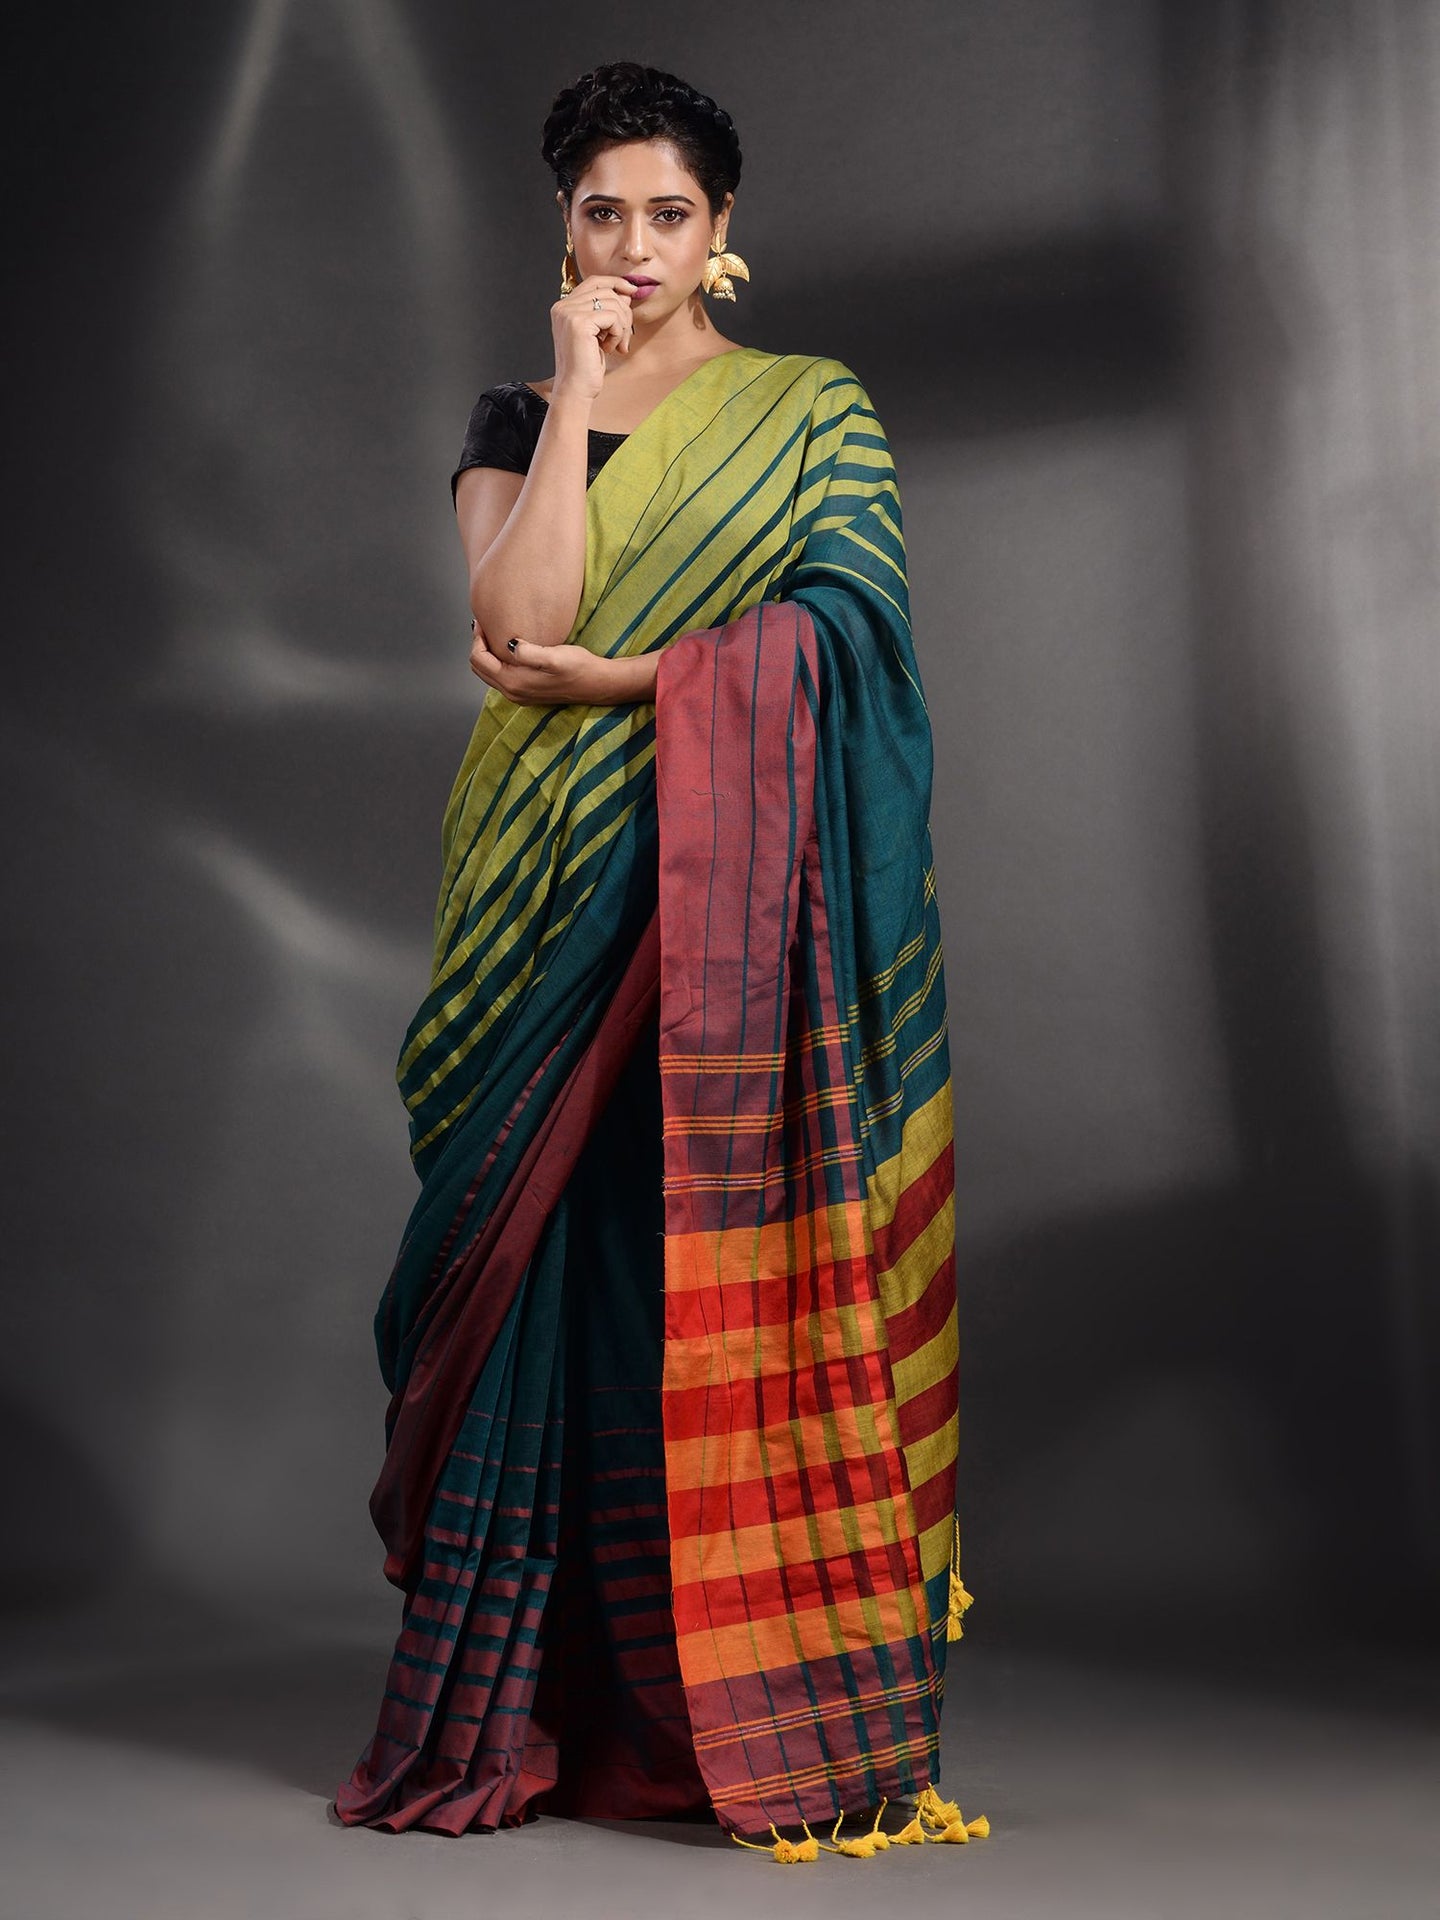 Teal Cotton Handwoven Saree With Stripe Border